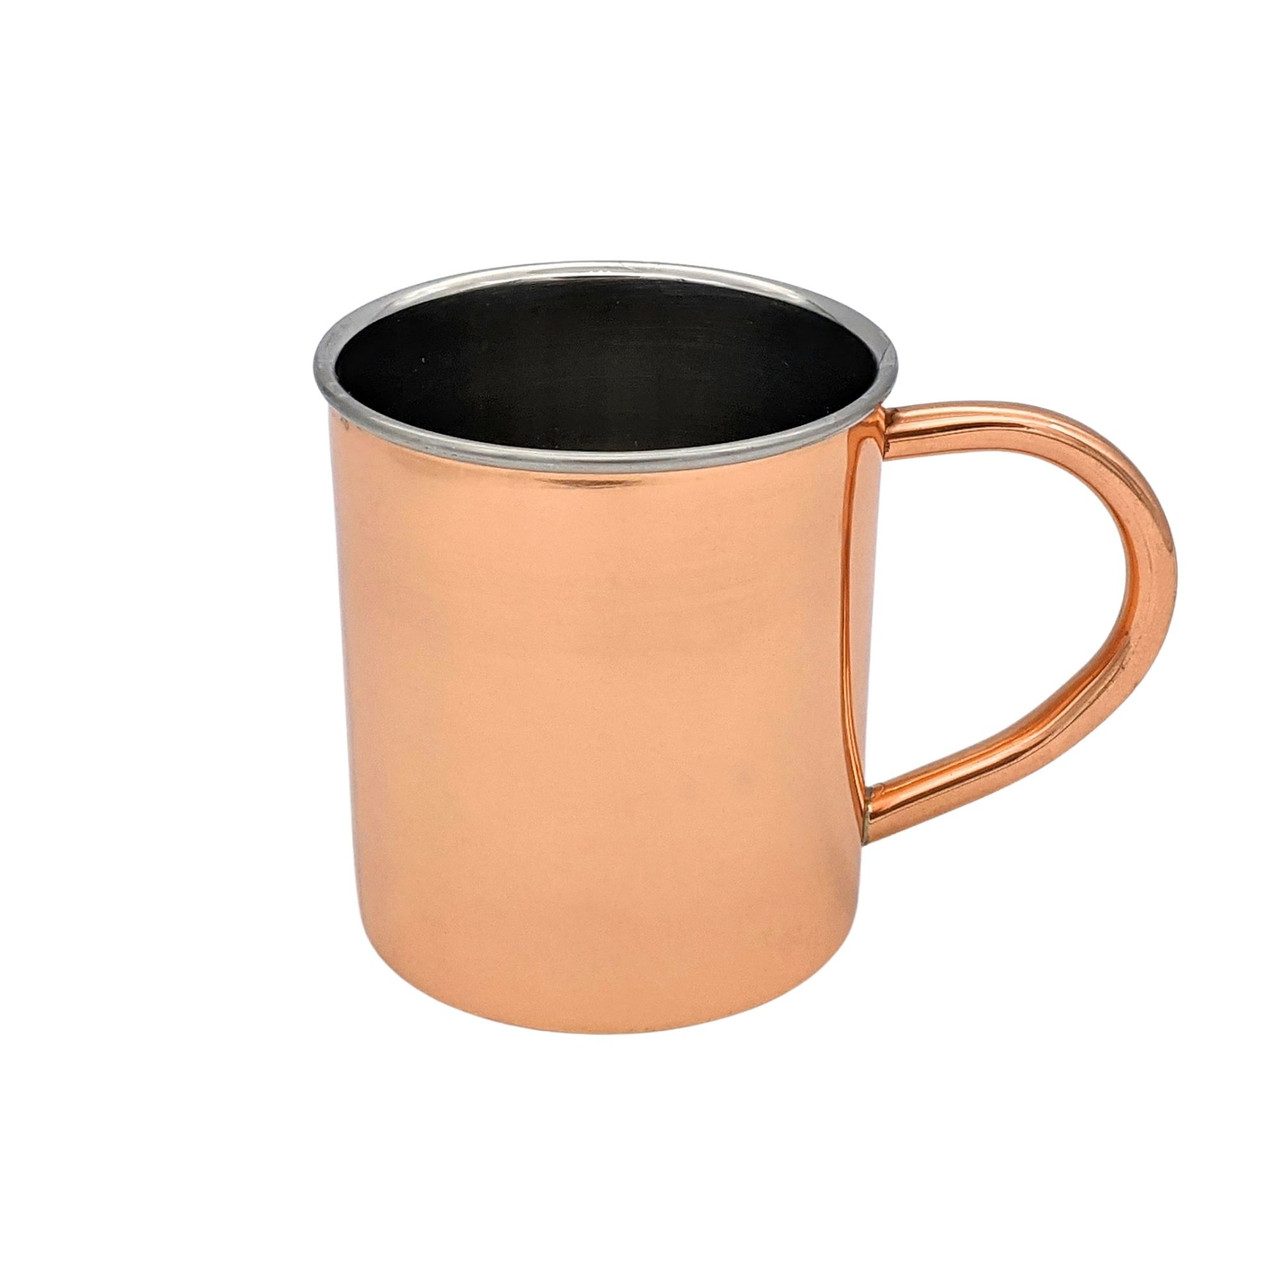 Moscow Mule Copper Mug - Copper Plated Double Wall Hammered